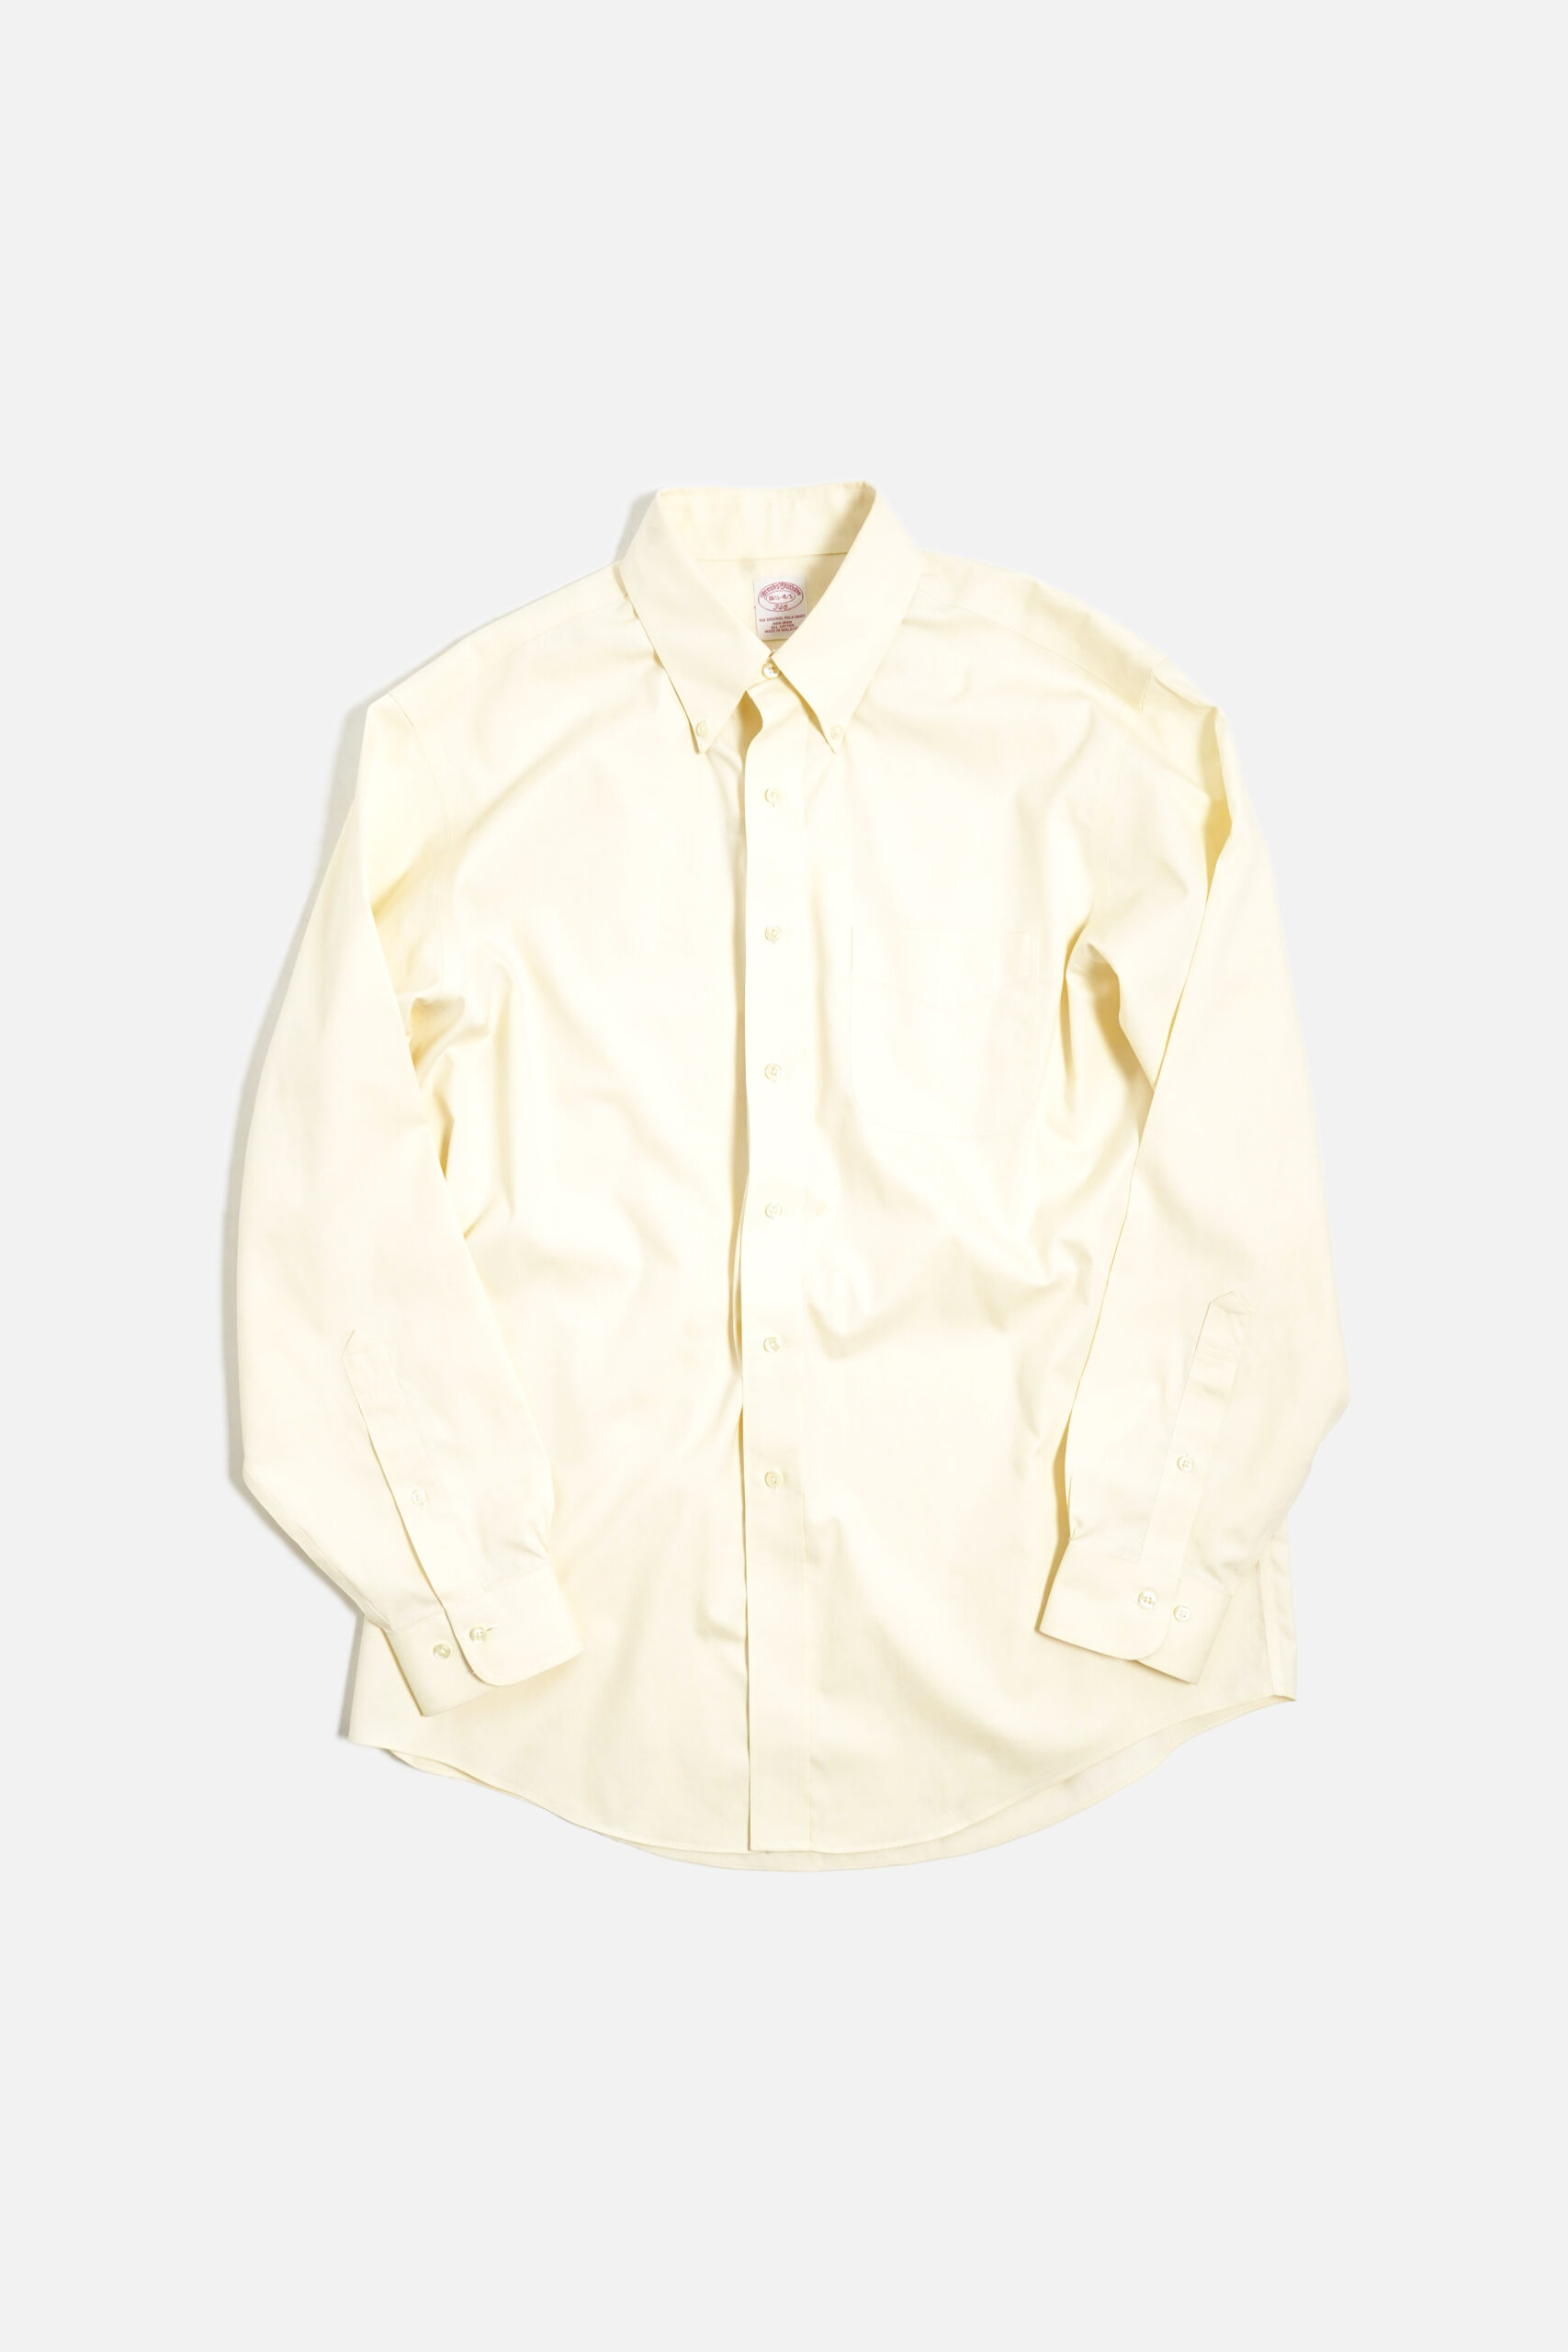 BROOKS BROTHERS CREAM COLOR COTTON SHIRTS